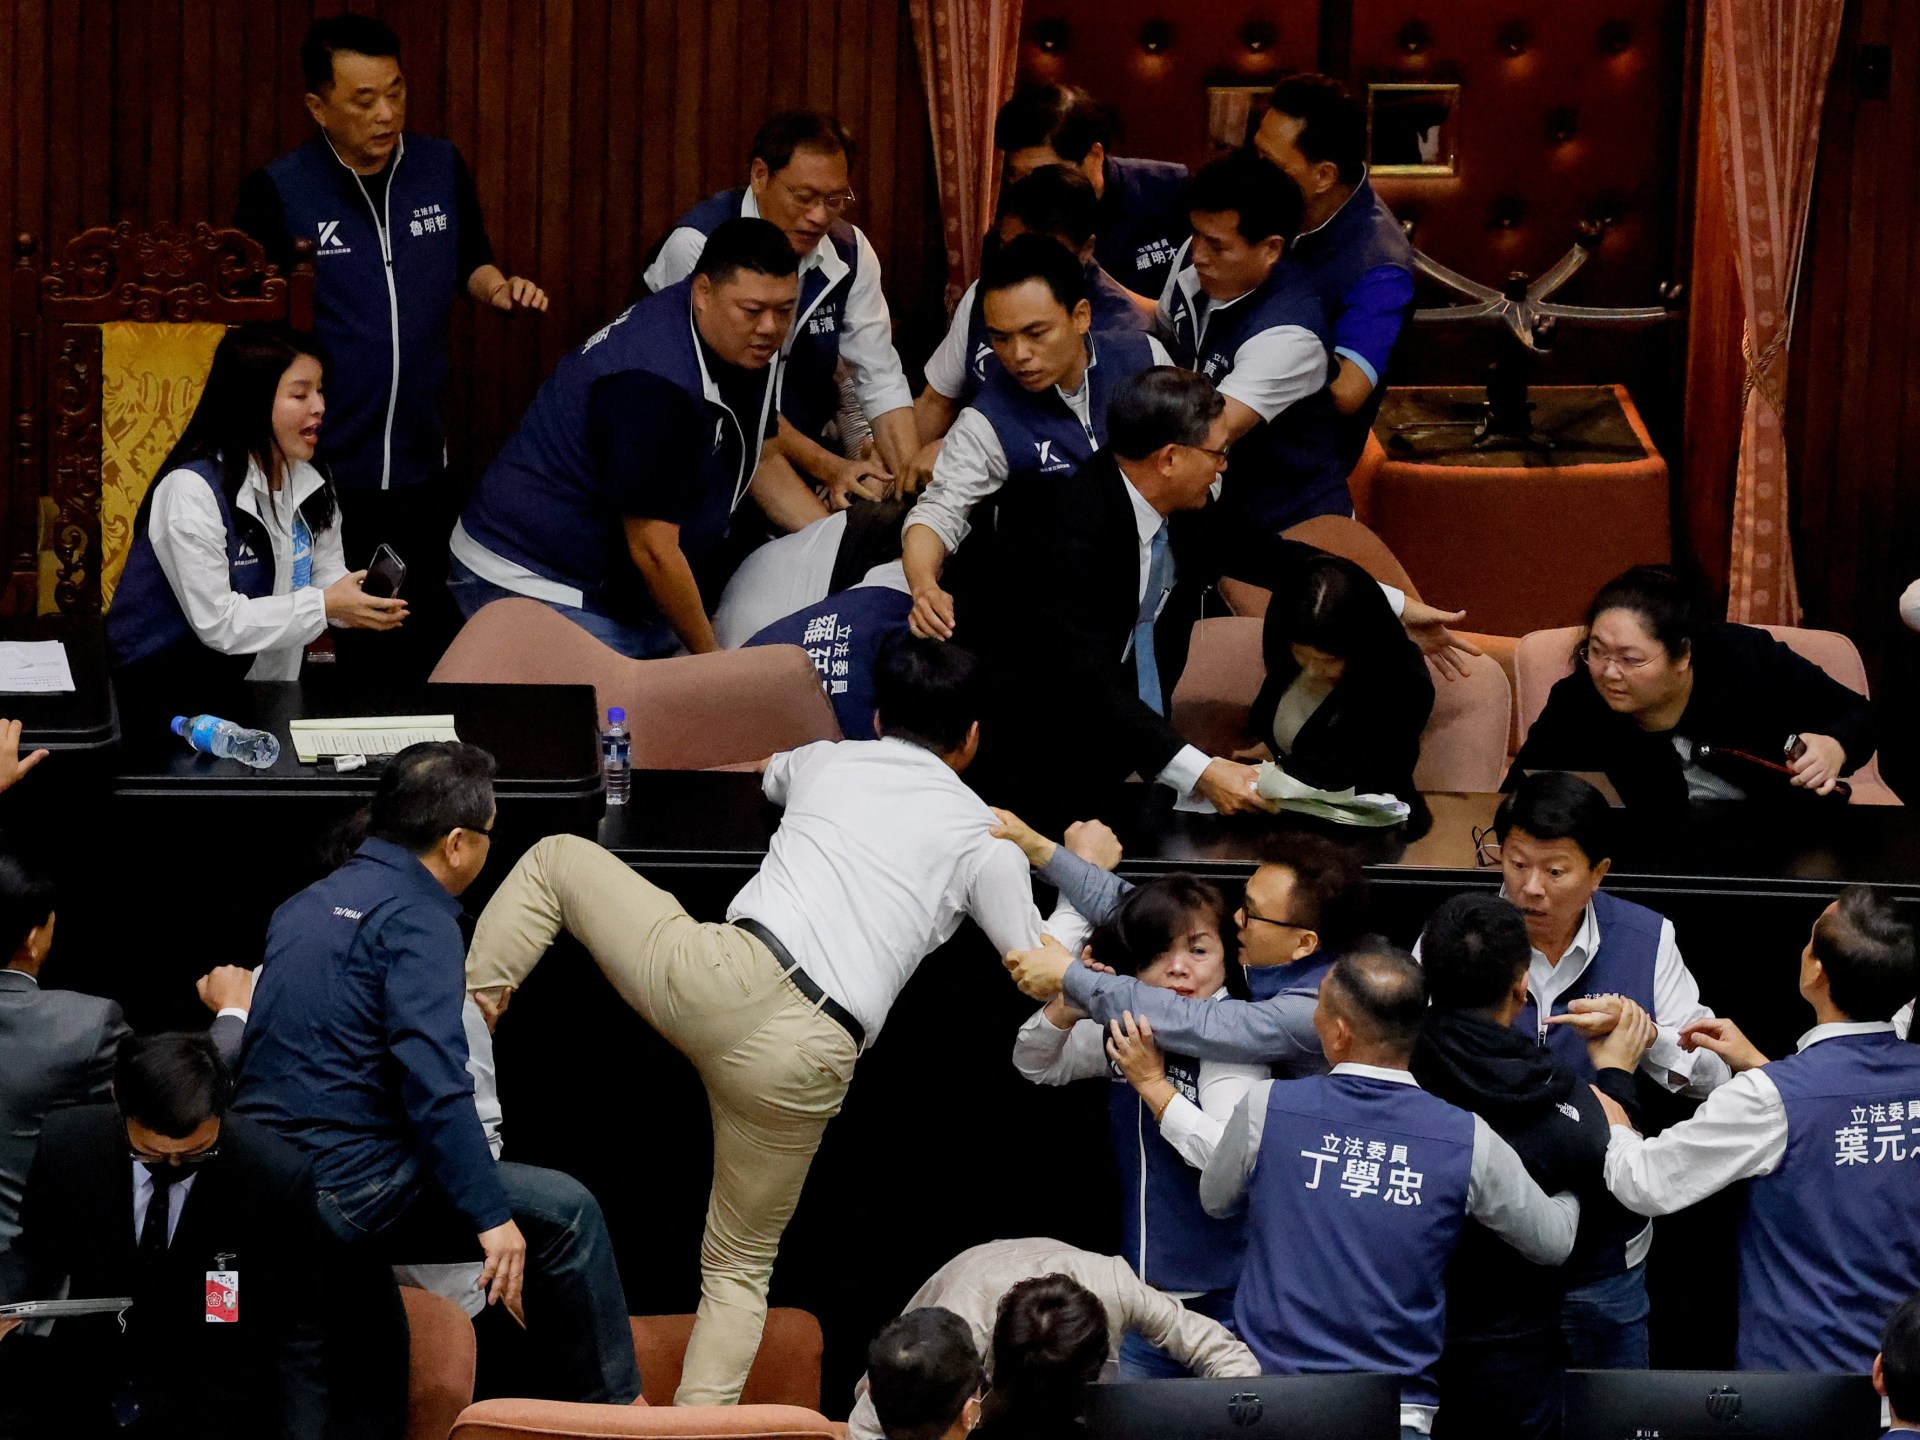 Scenes of chaos as Taiwan parliament brawl escalates into the night | Newsfeed [Video]